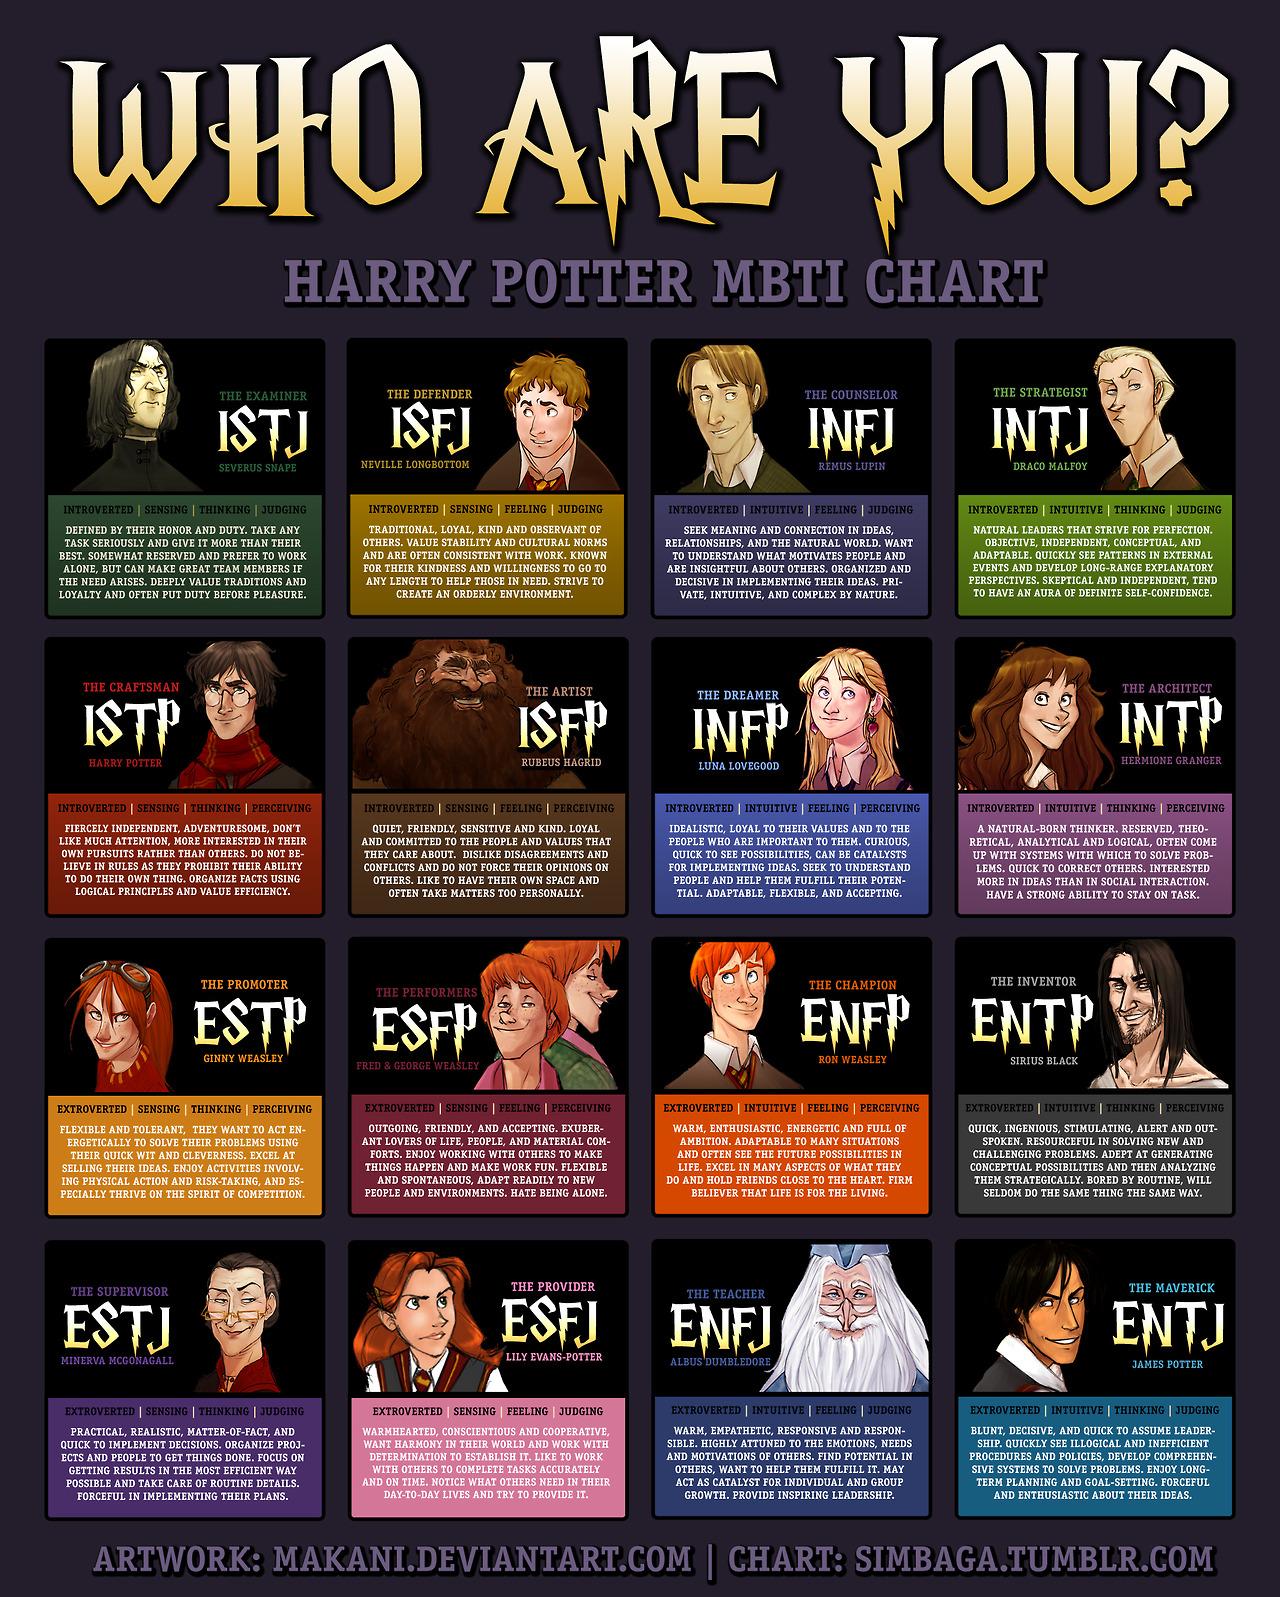 Harry Potter MBTI by MBTI-Characters